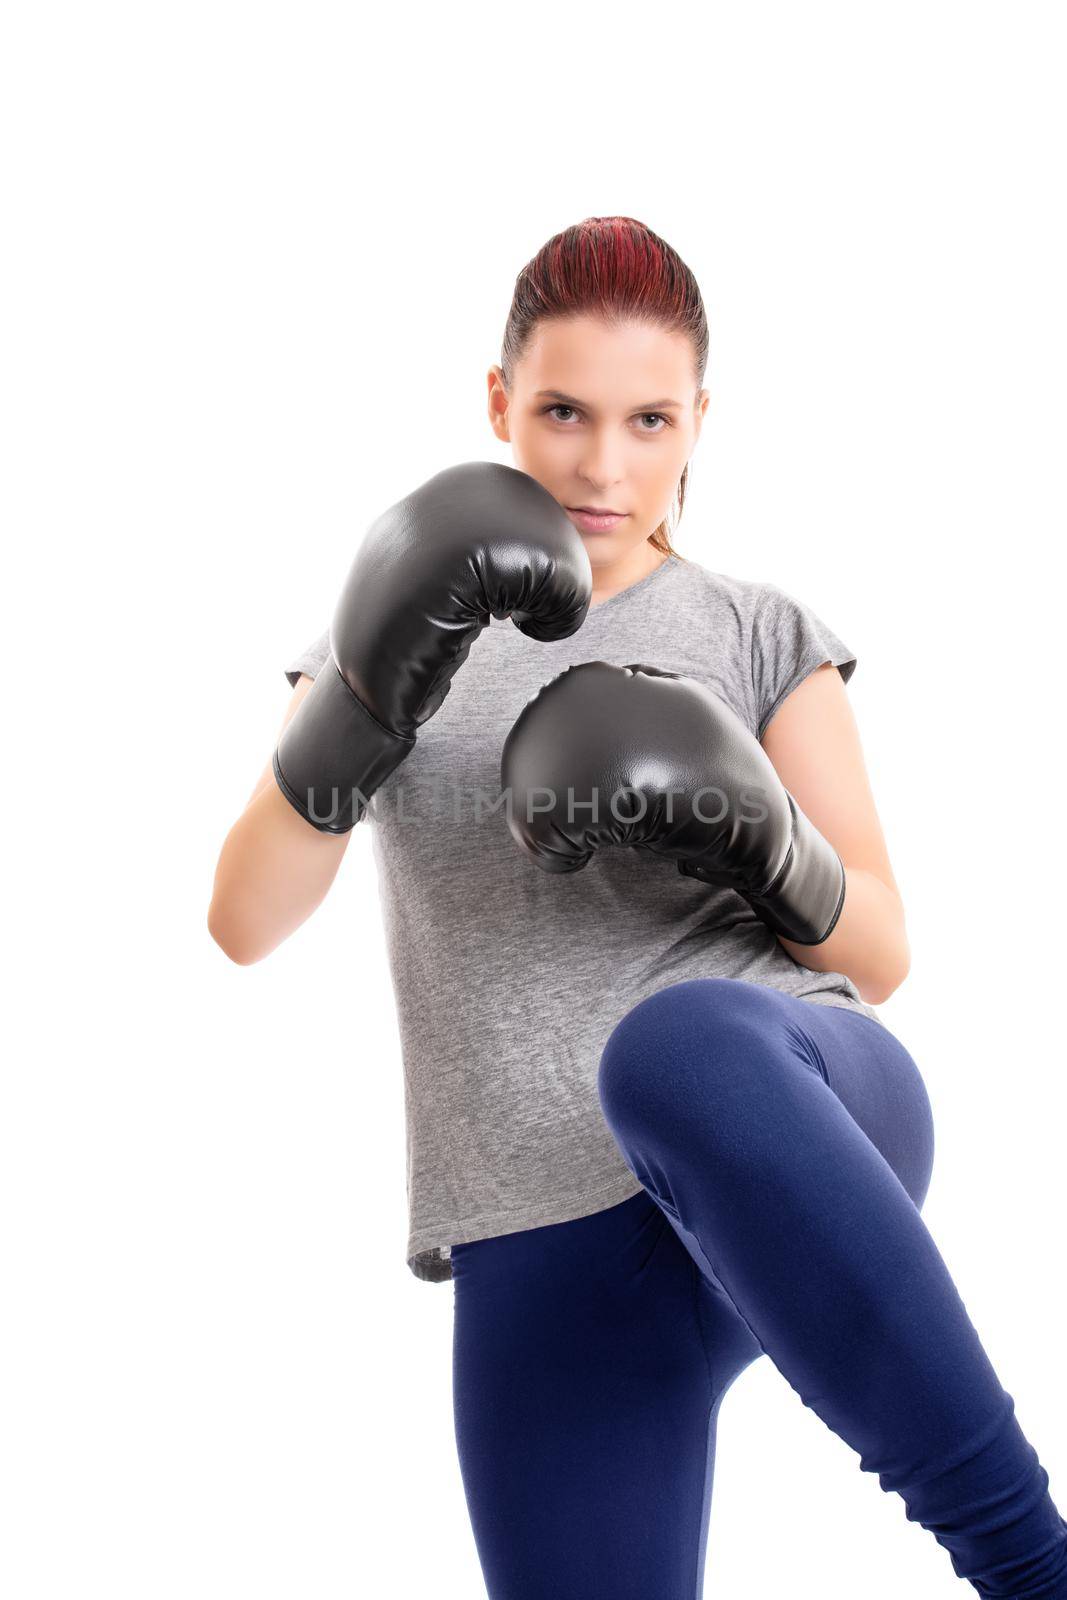 Portrait of a beautiful young serious girl with boxing gloves lifting her knee, isolated on white background. Combat sport concept.